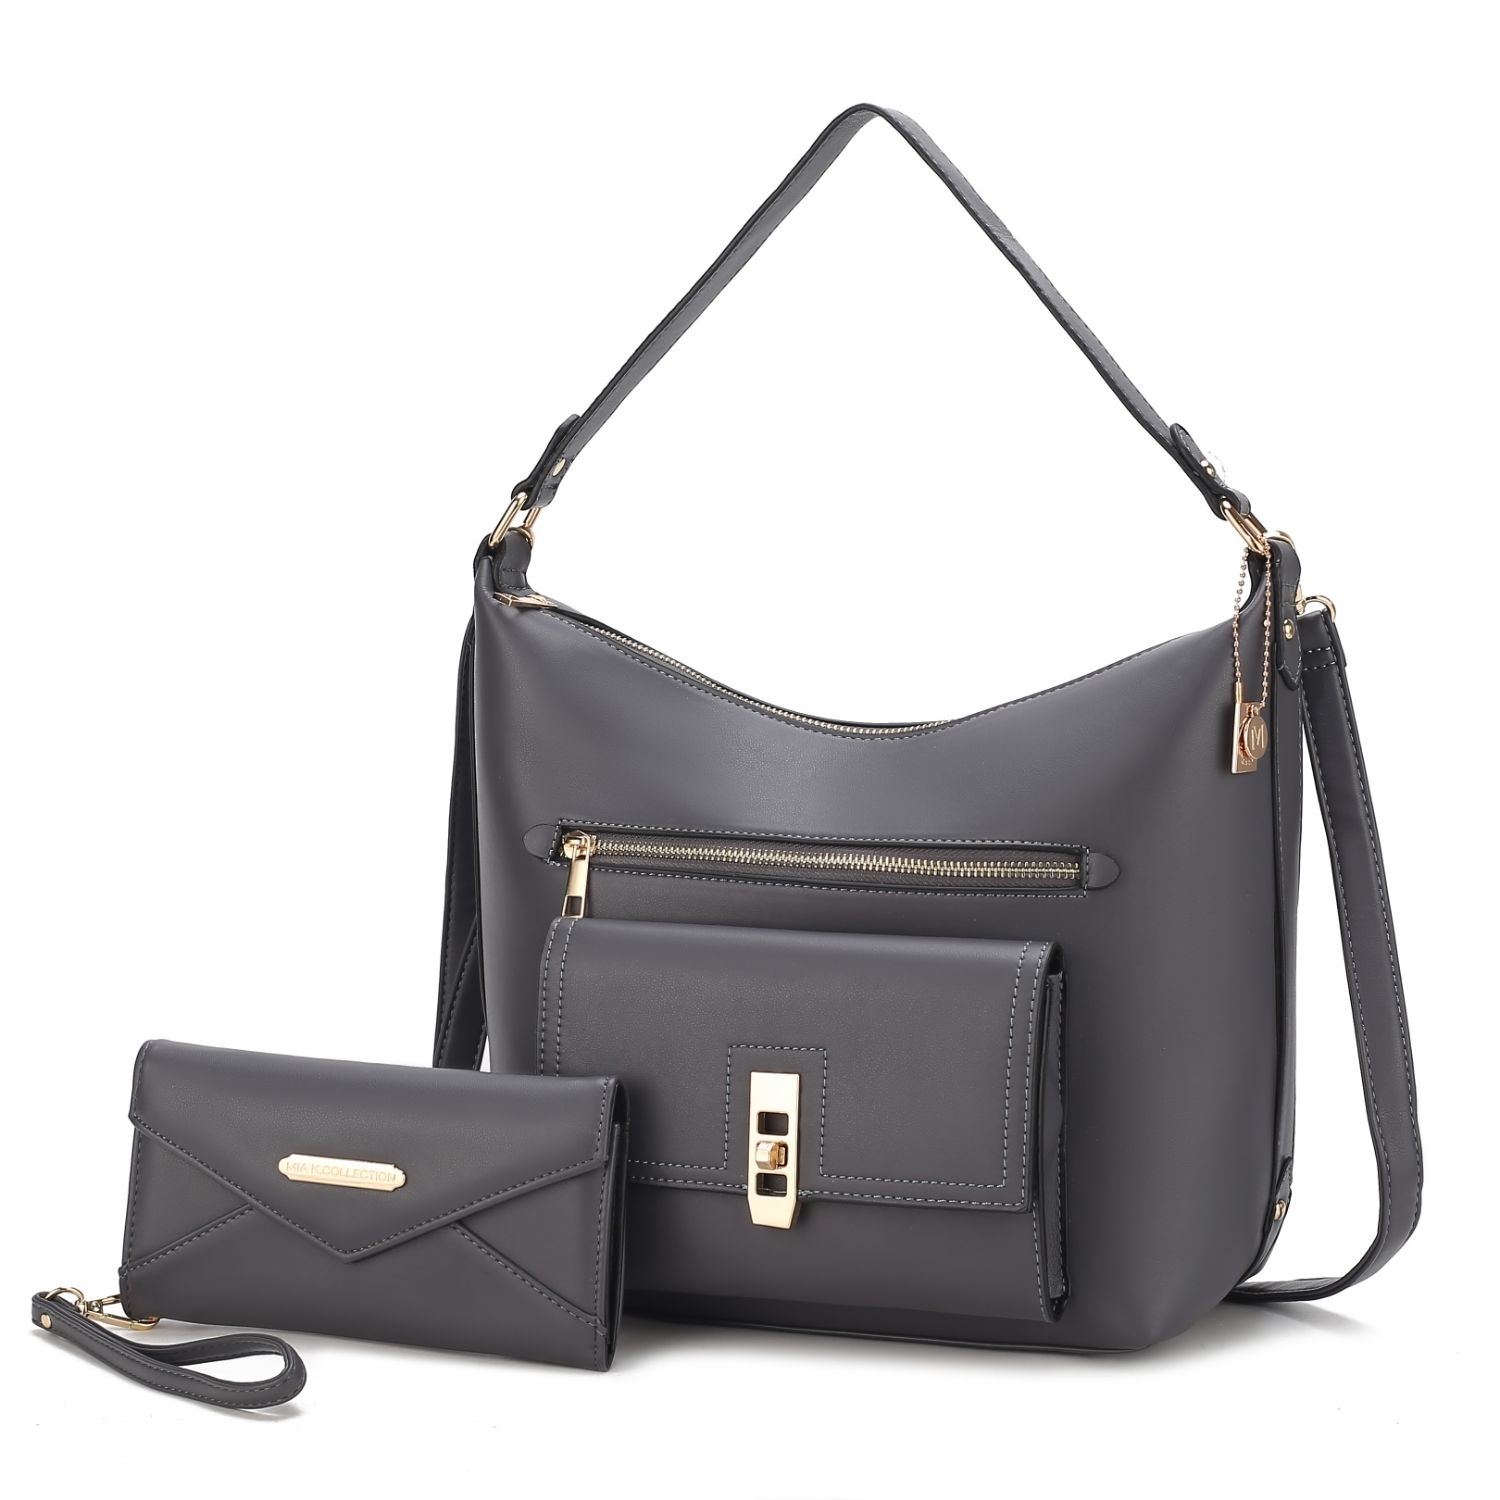 MKF Collection Clara Vegan Leather Women's Shoulder Bag With Wristlet Wallet - 2 Pieces By Mia K - Charcoal